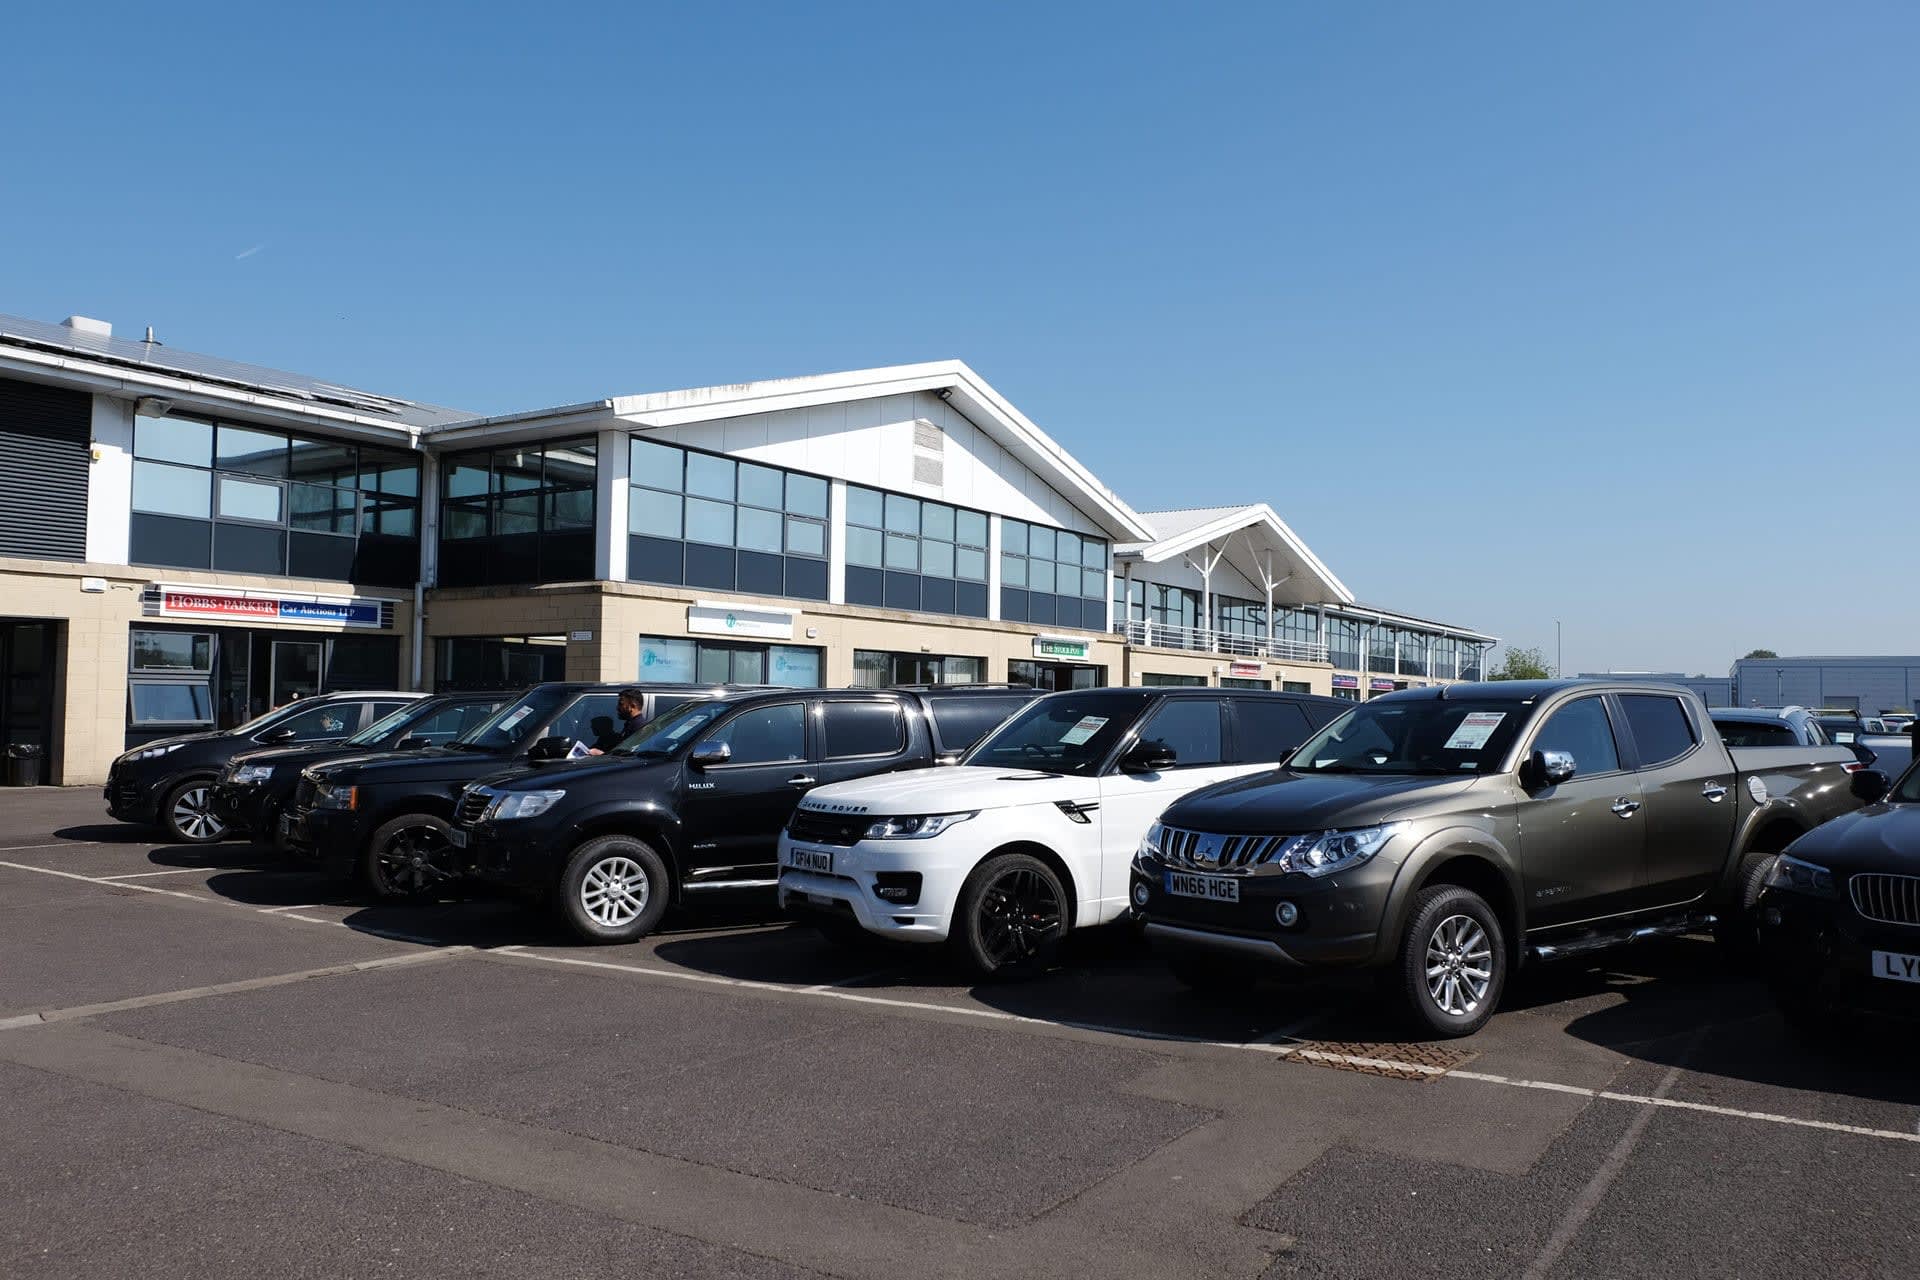 1 – Come along to our car auction offices